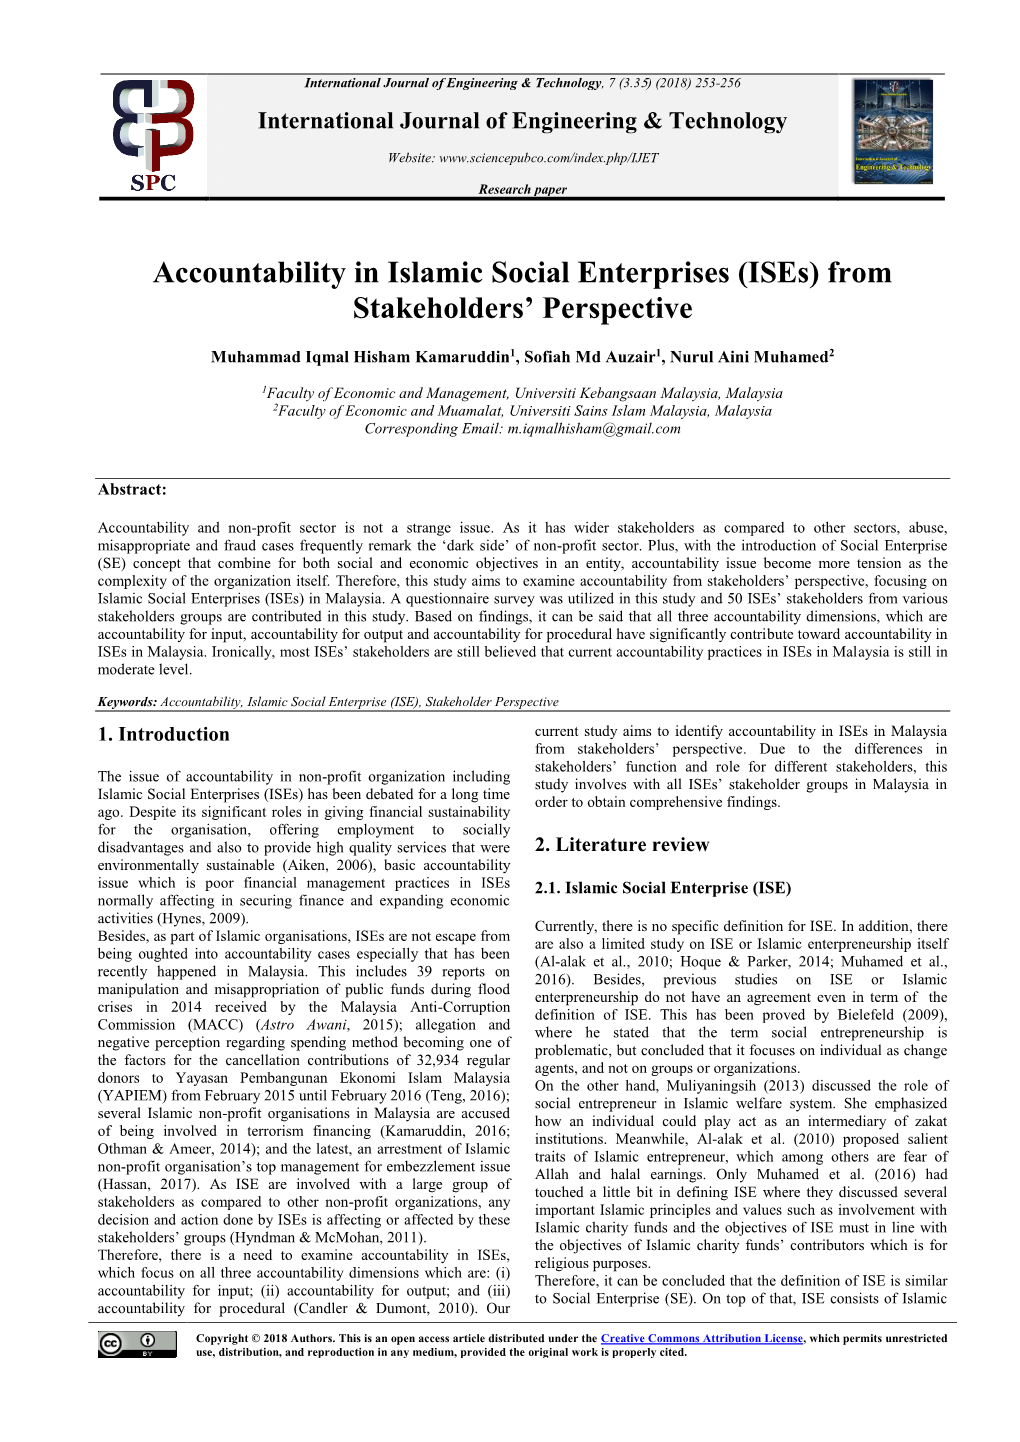 Accountability in Islamic Social Enterprises (Ises) from Stakeholders’ Perspective